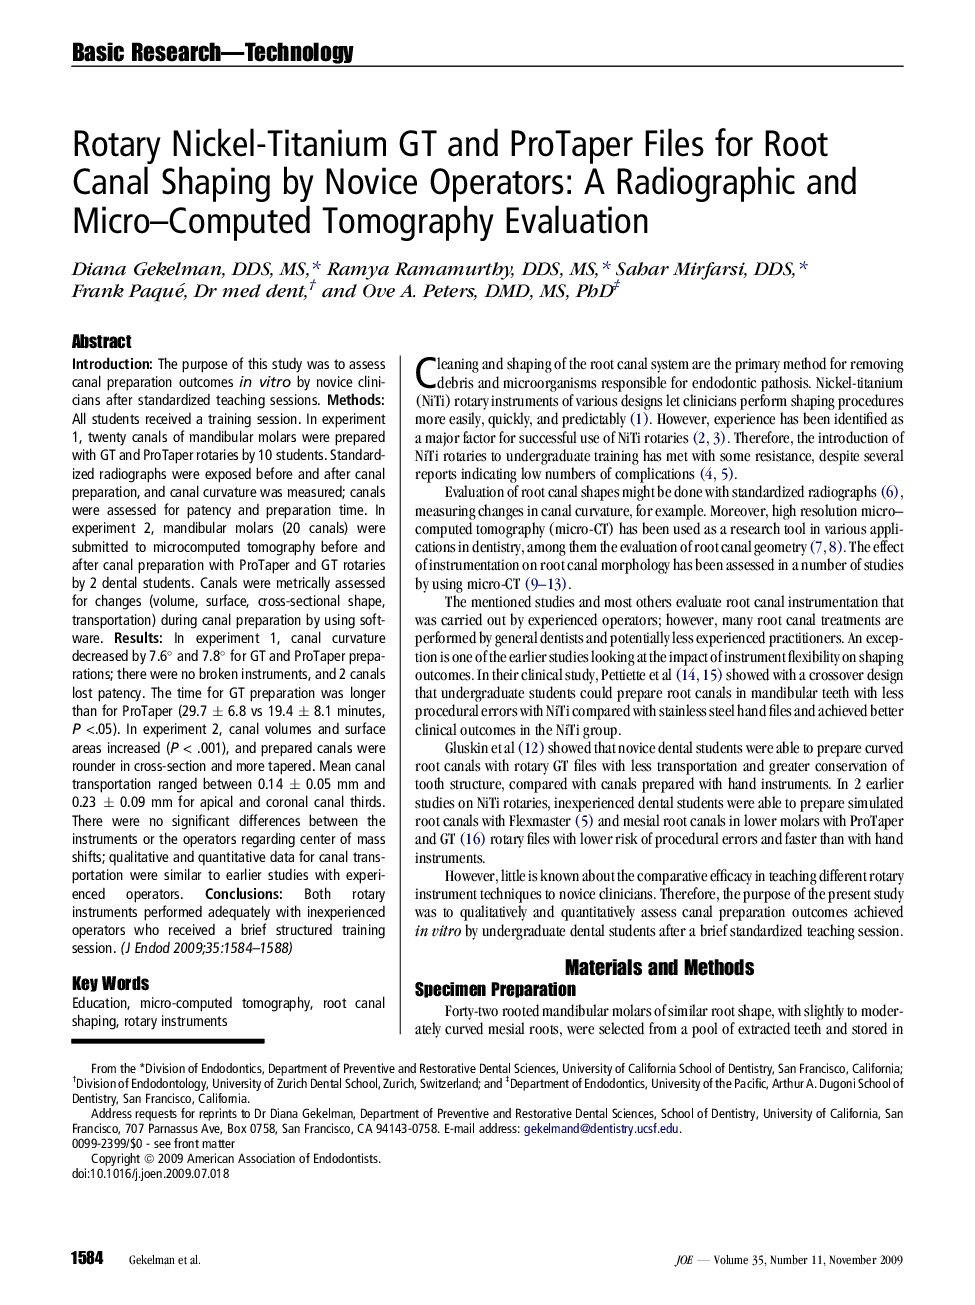 Rotary Nickel-Titanium GT and ProTaper Files for Root Canal Shaping by Novice Operators: A Radiographic and Micro–Computed Tomography Evaluation